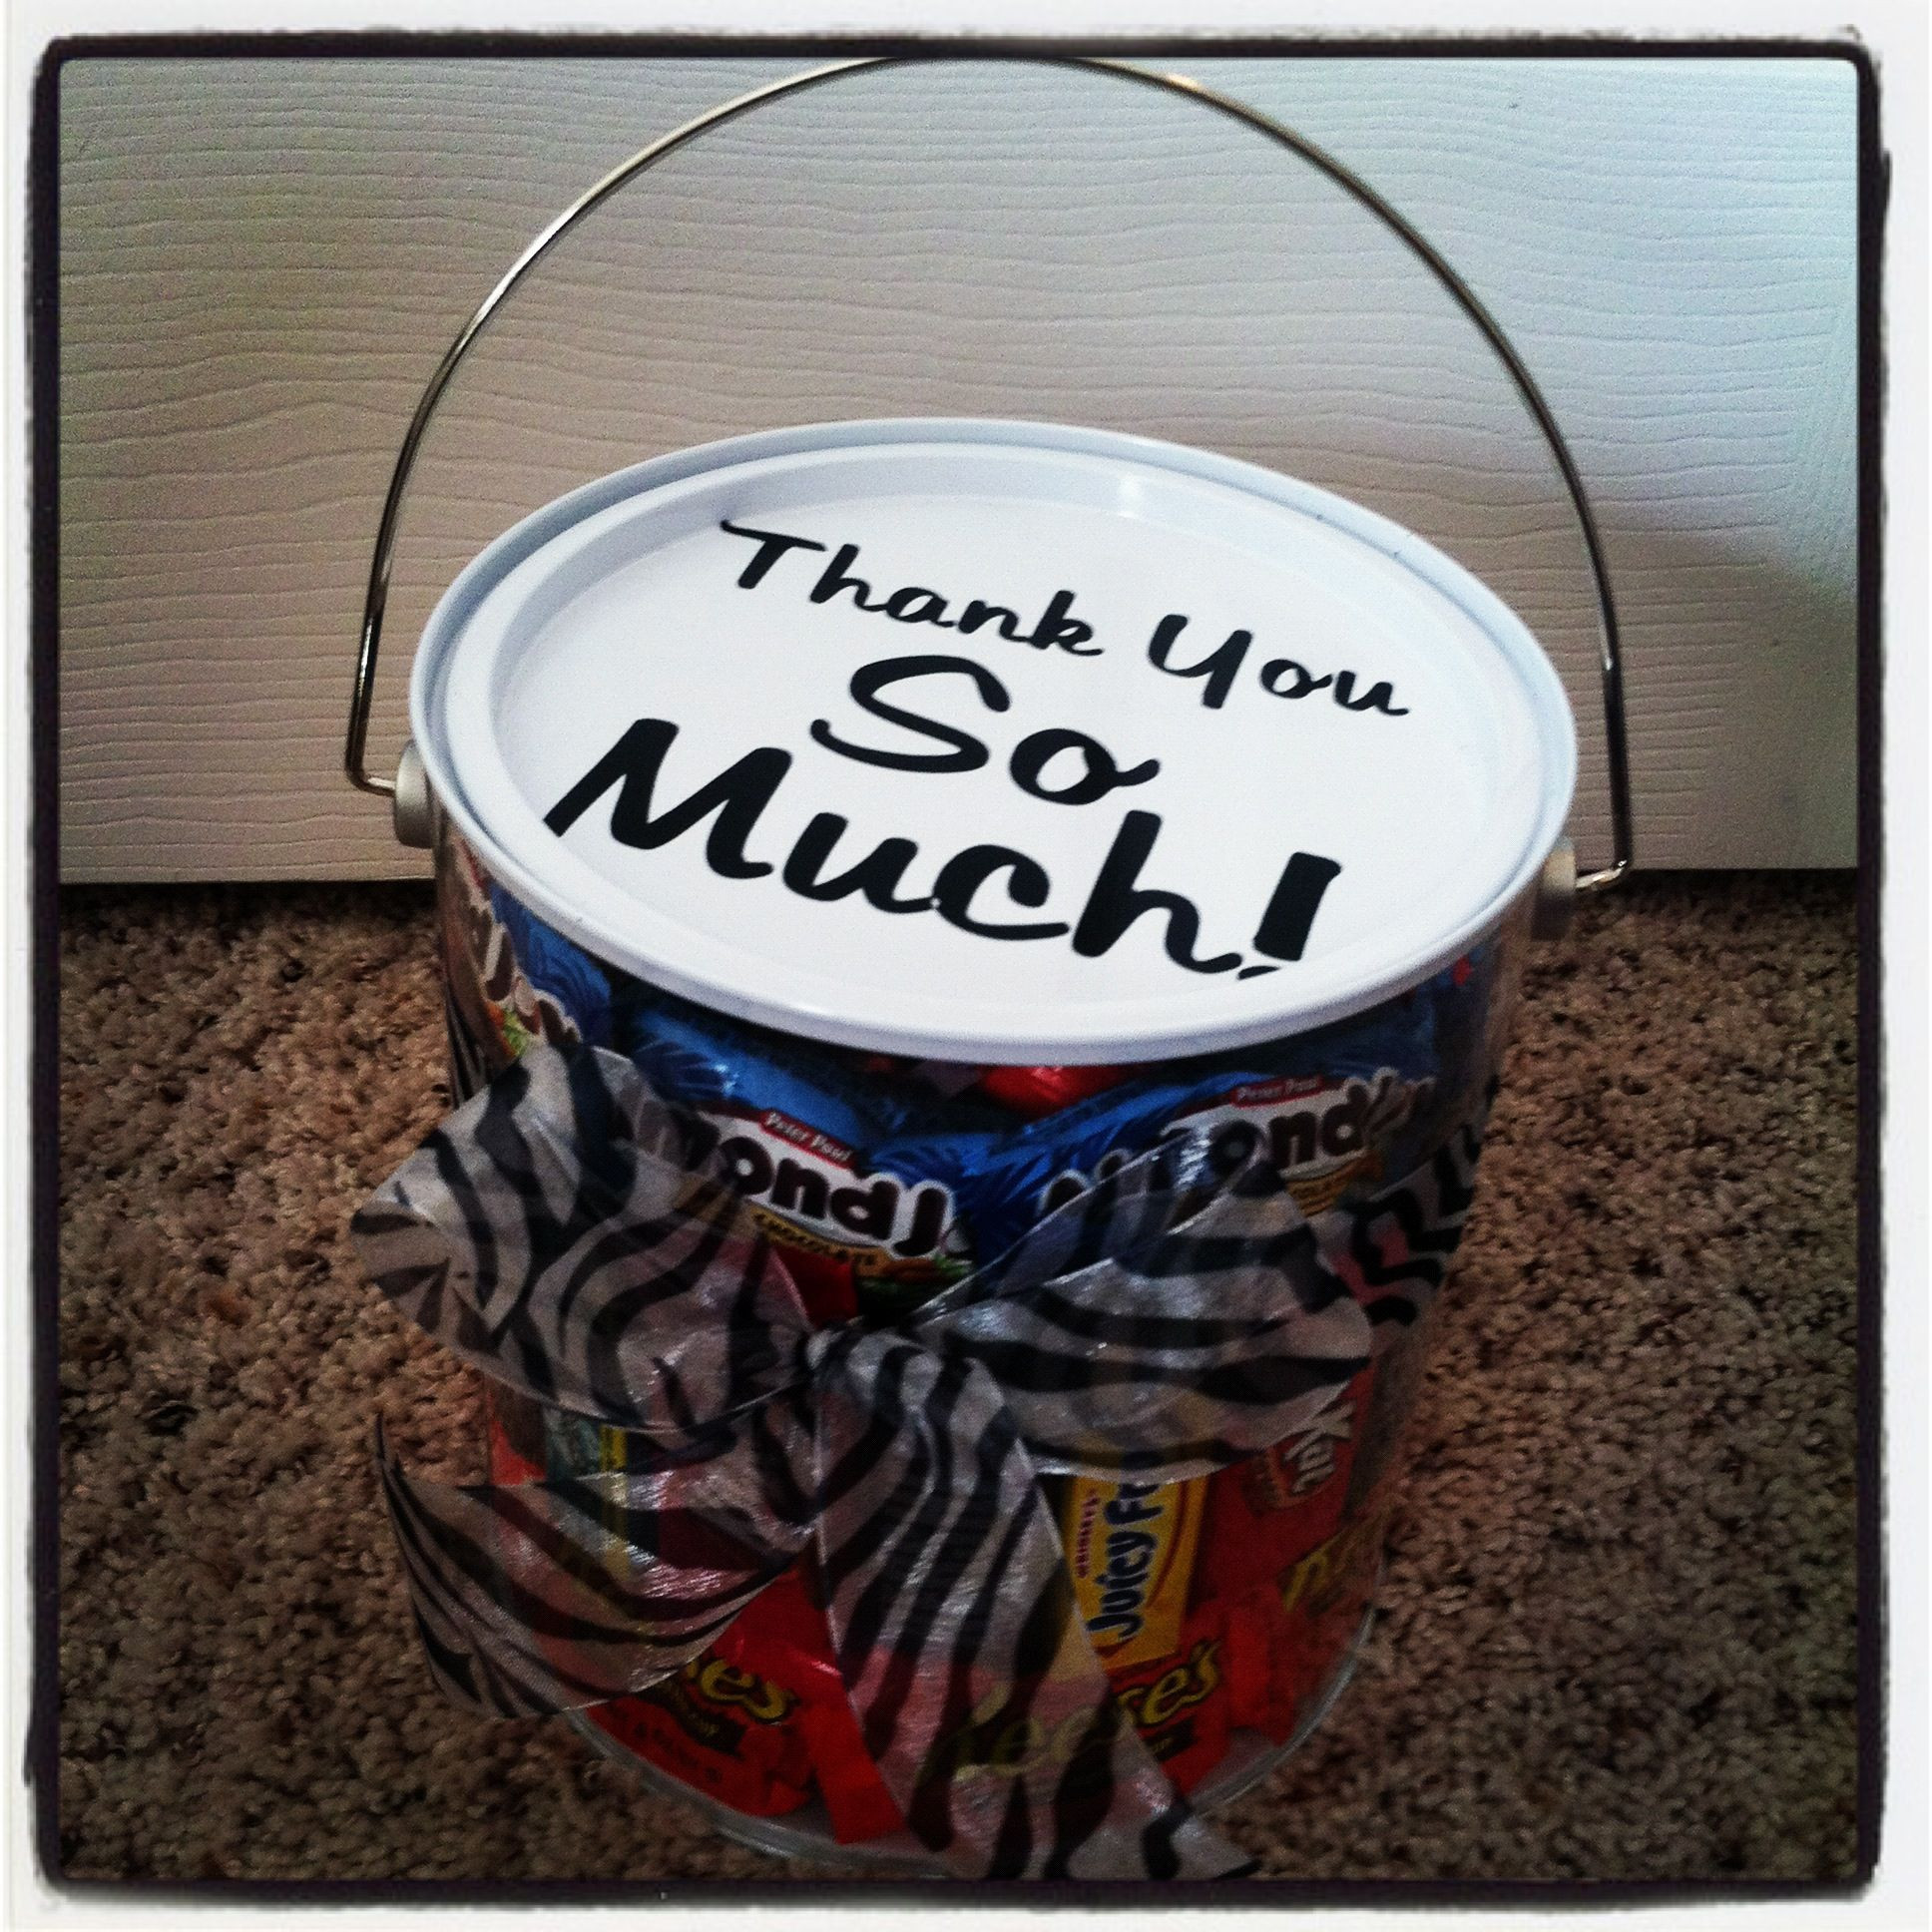 Thank You Gift Ideas For Coworker
 "Thank you " Gift for coworkers t ideas